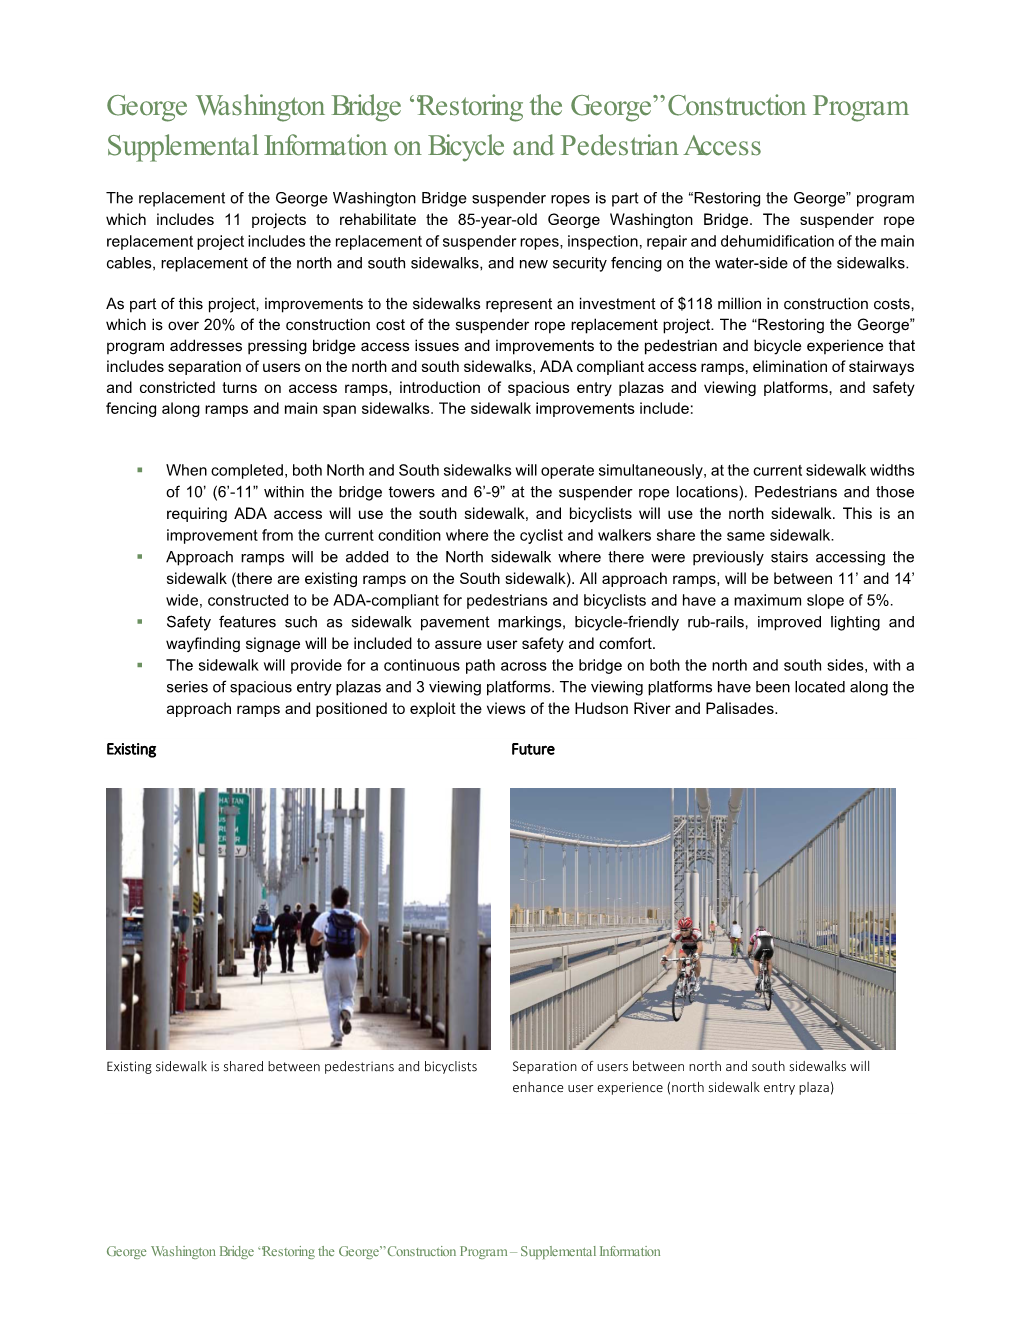 George Washington Bridge “Restoring the George” Construction Program Supplemental Information on Bicycle and Pedestrian Access